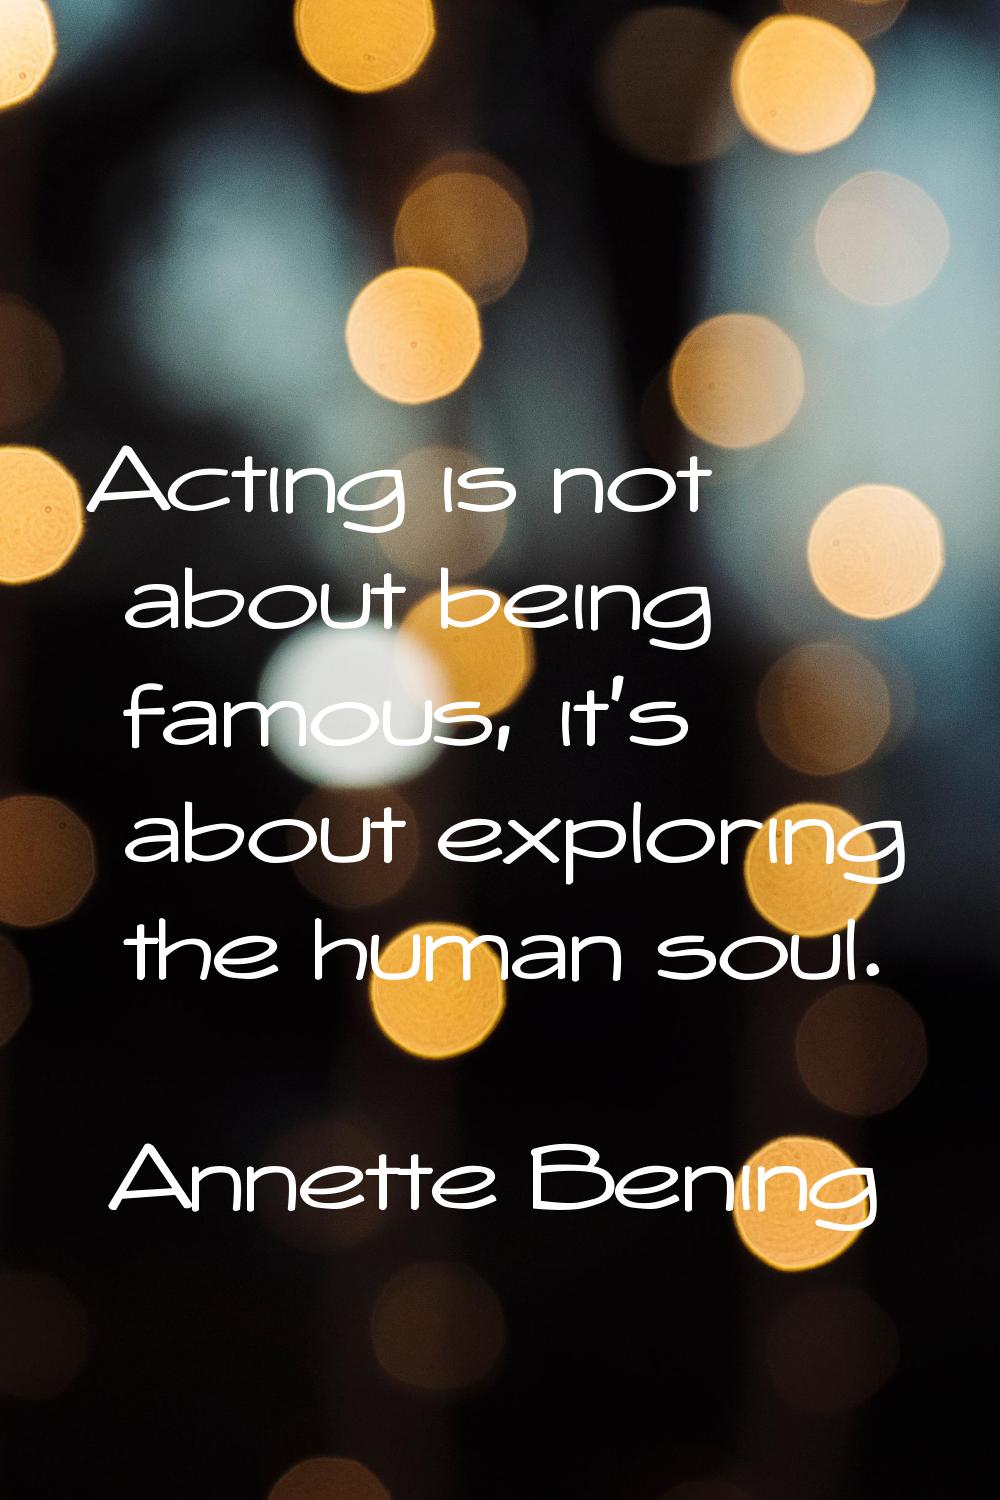 Acting is not about being famous, it's about exploring the human soul.